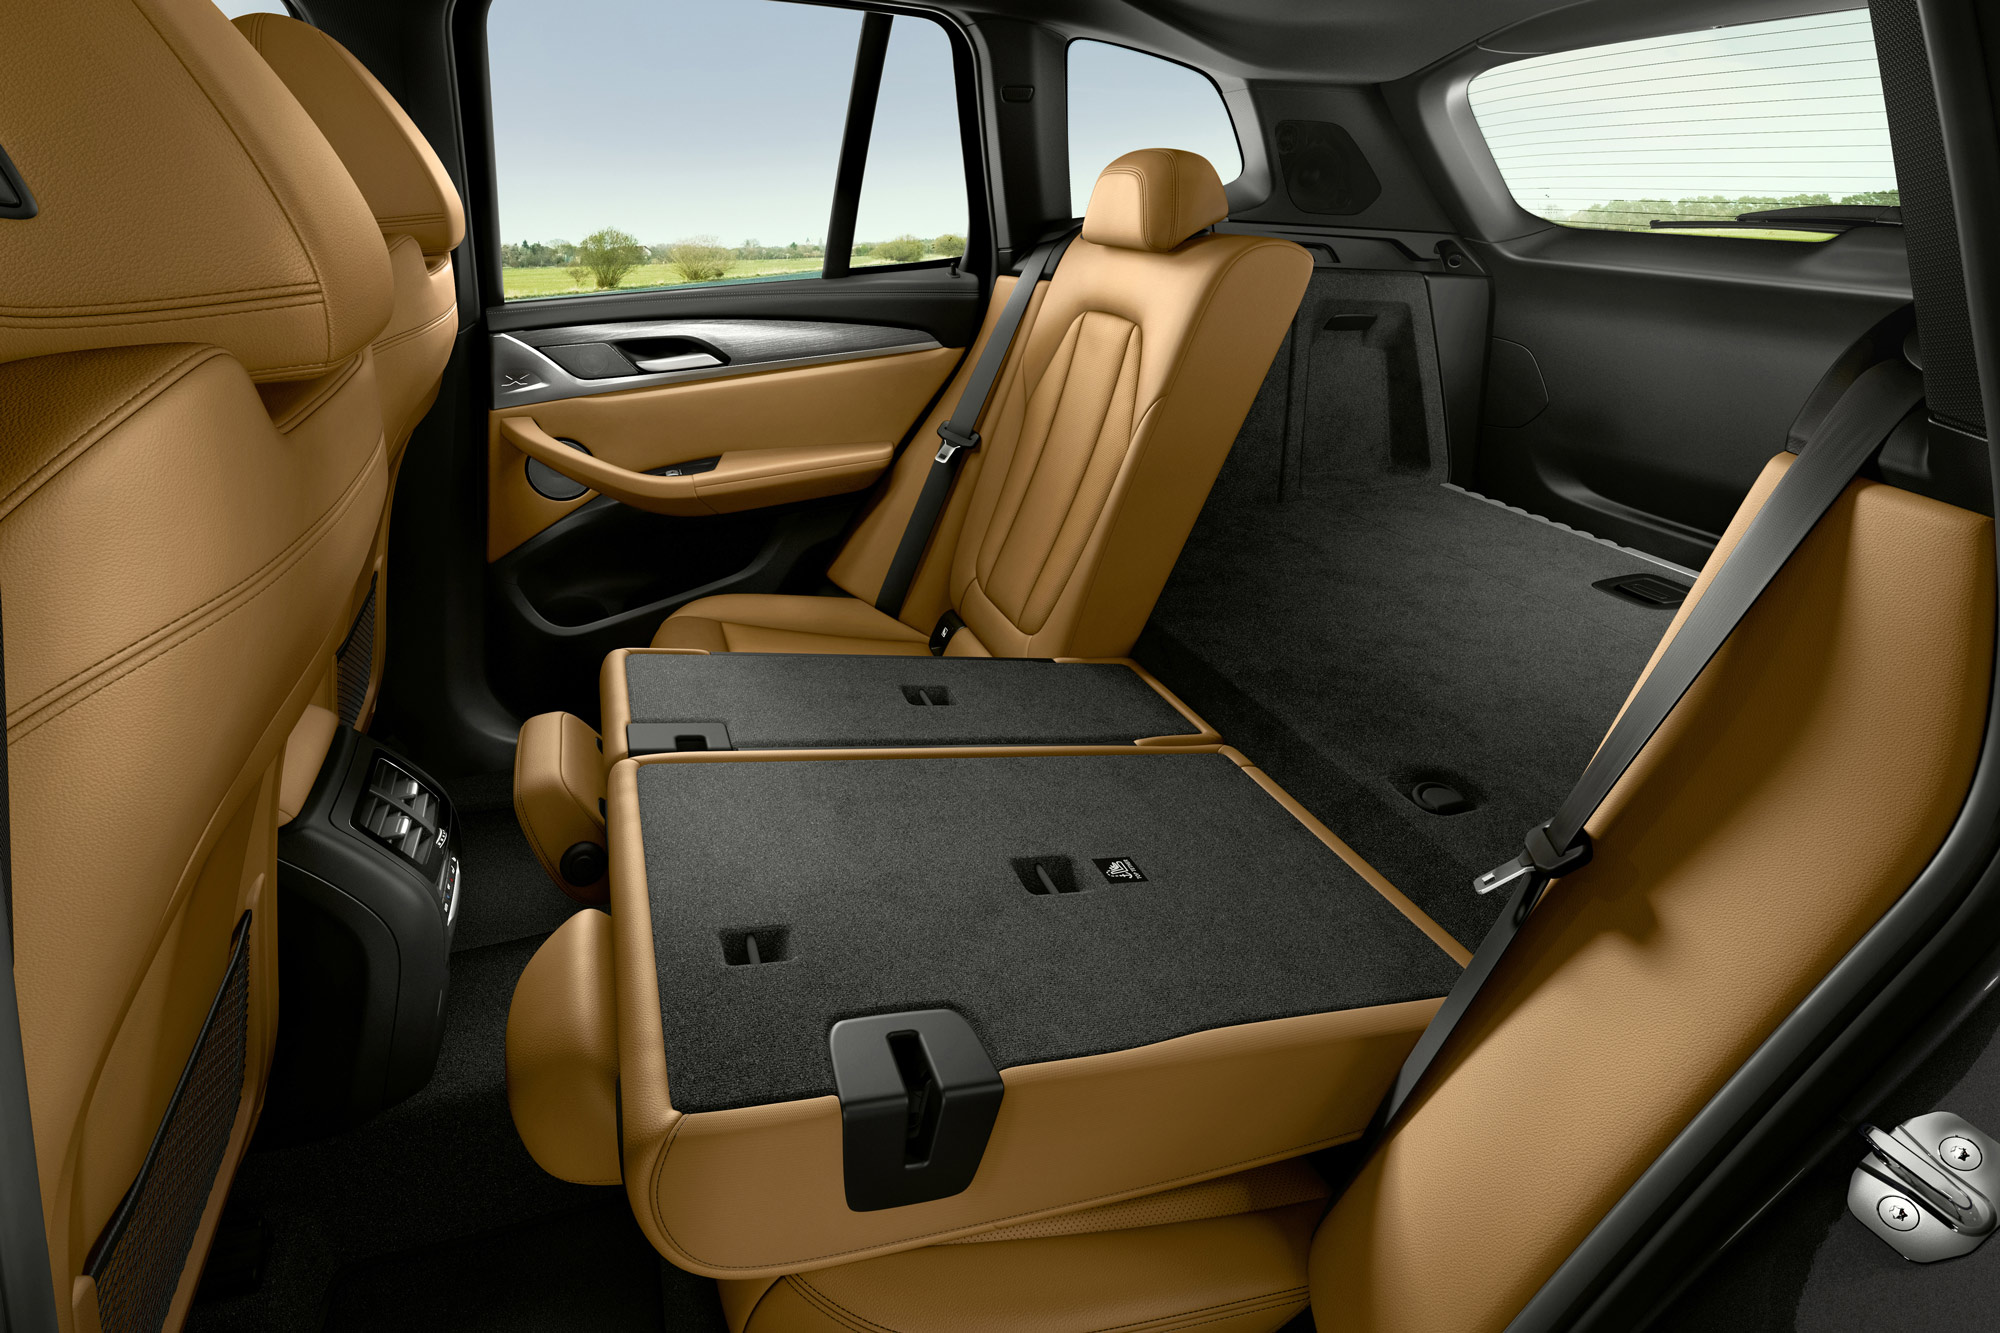 BMW X3 brown leather interior and cargo space